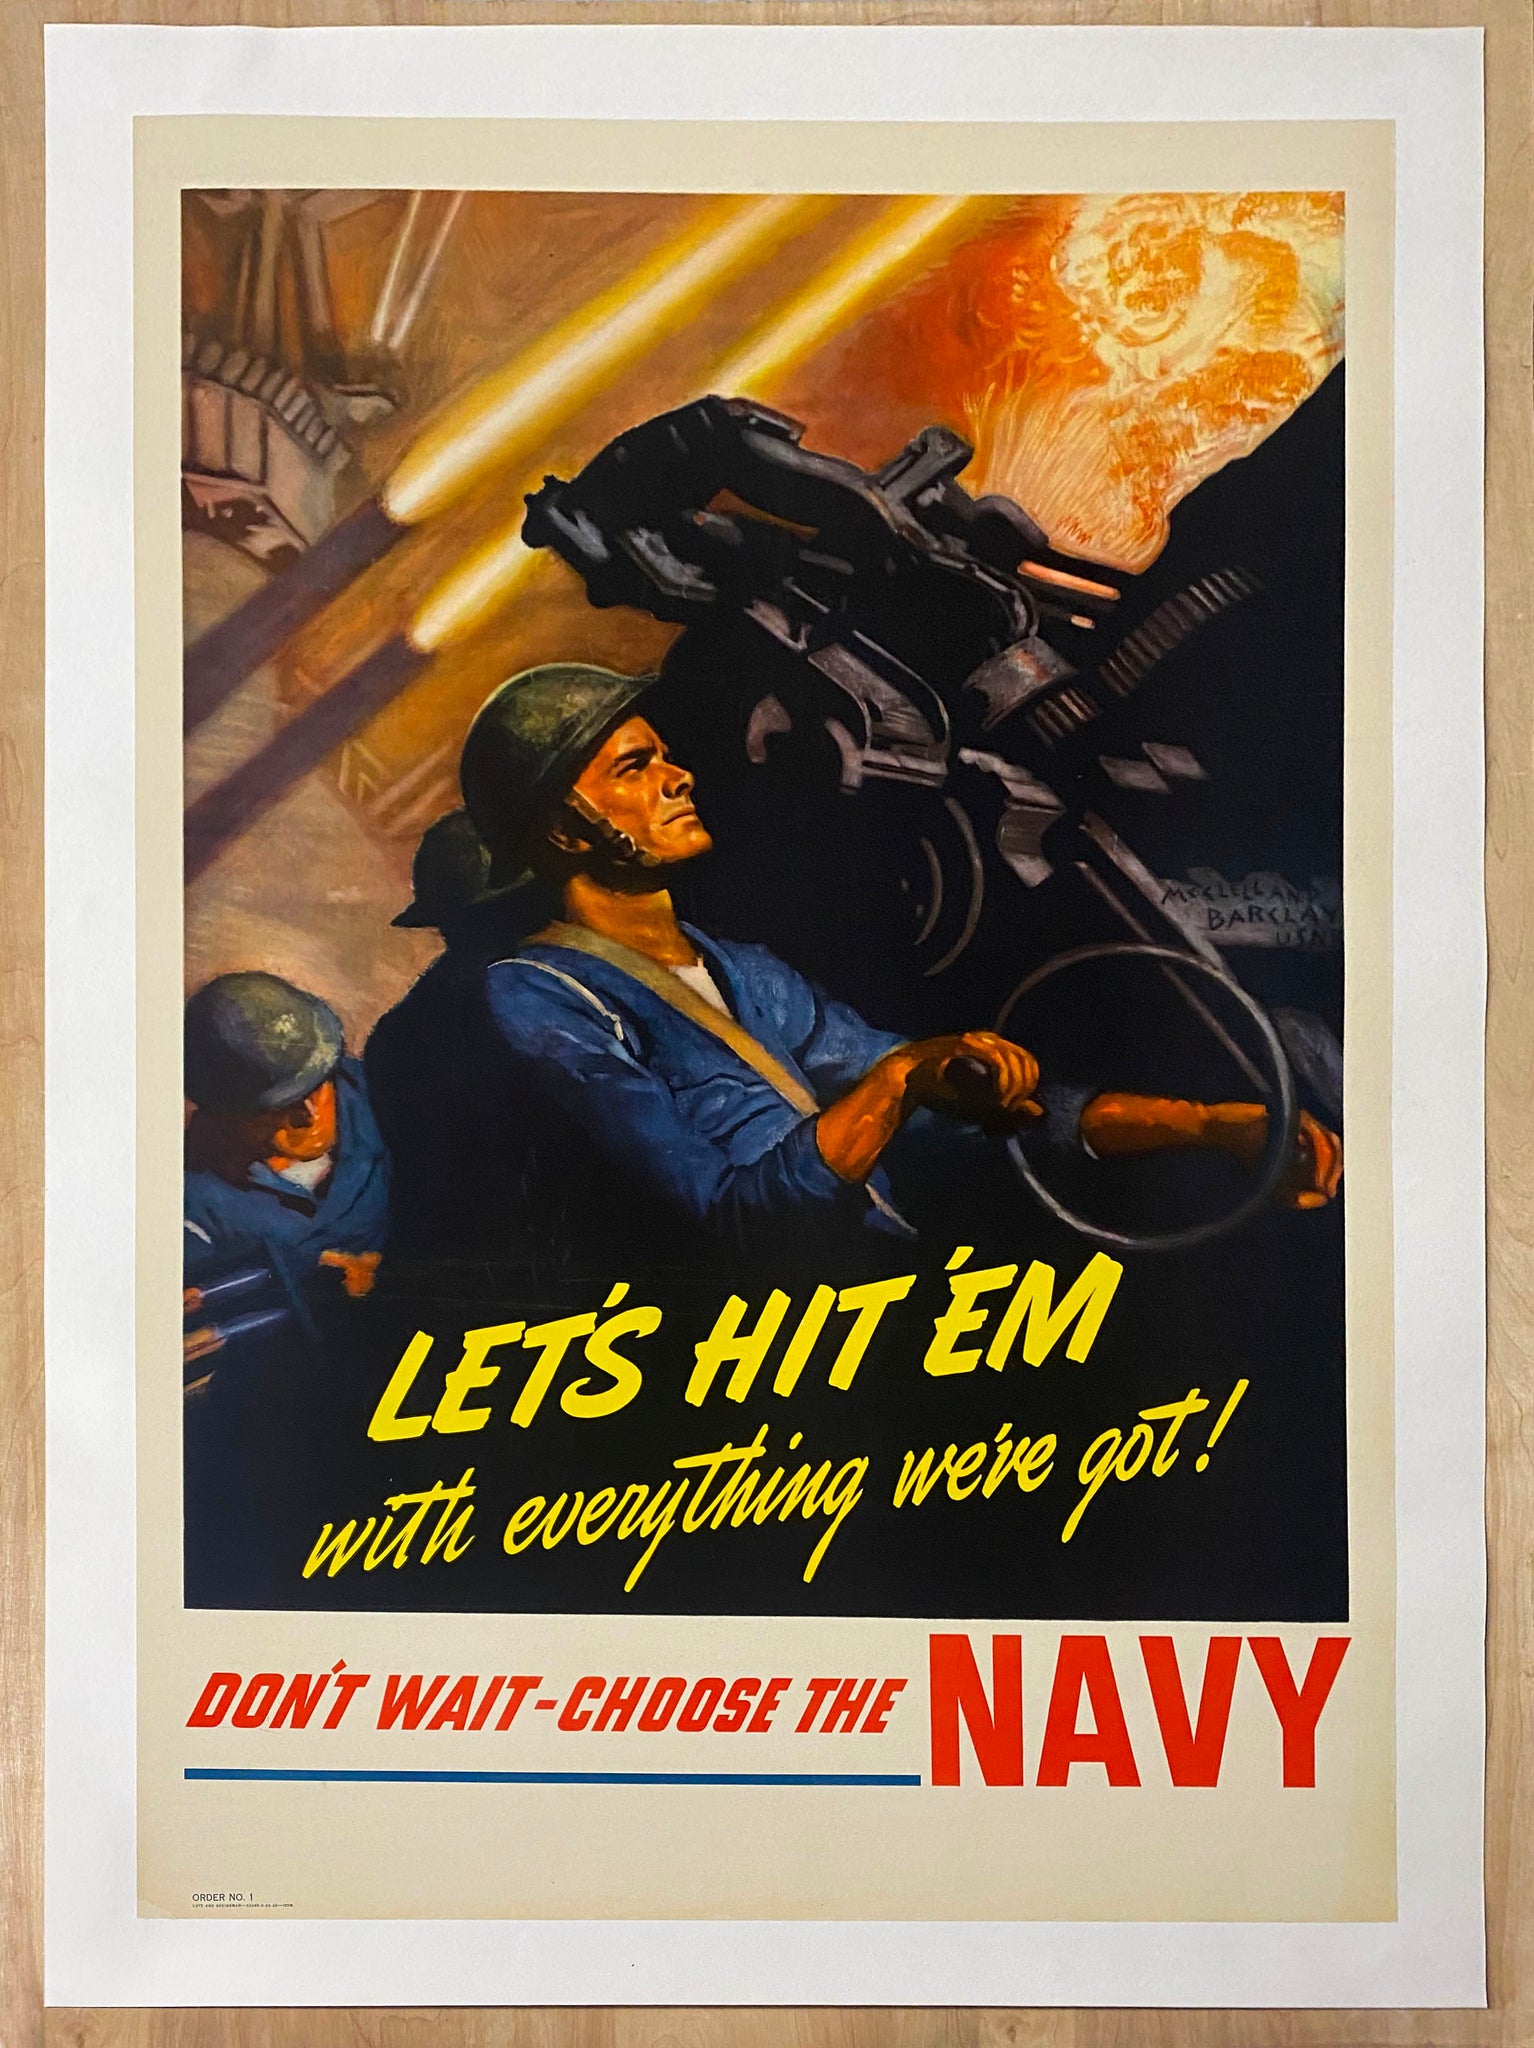 1942 Lets Hit Them with Everything We've Got Navy McClelland Barclay WWII